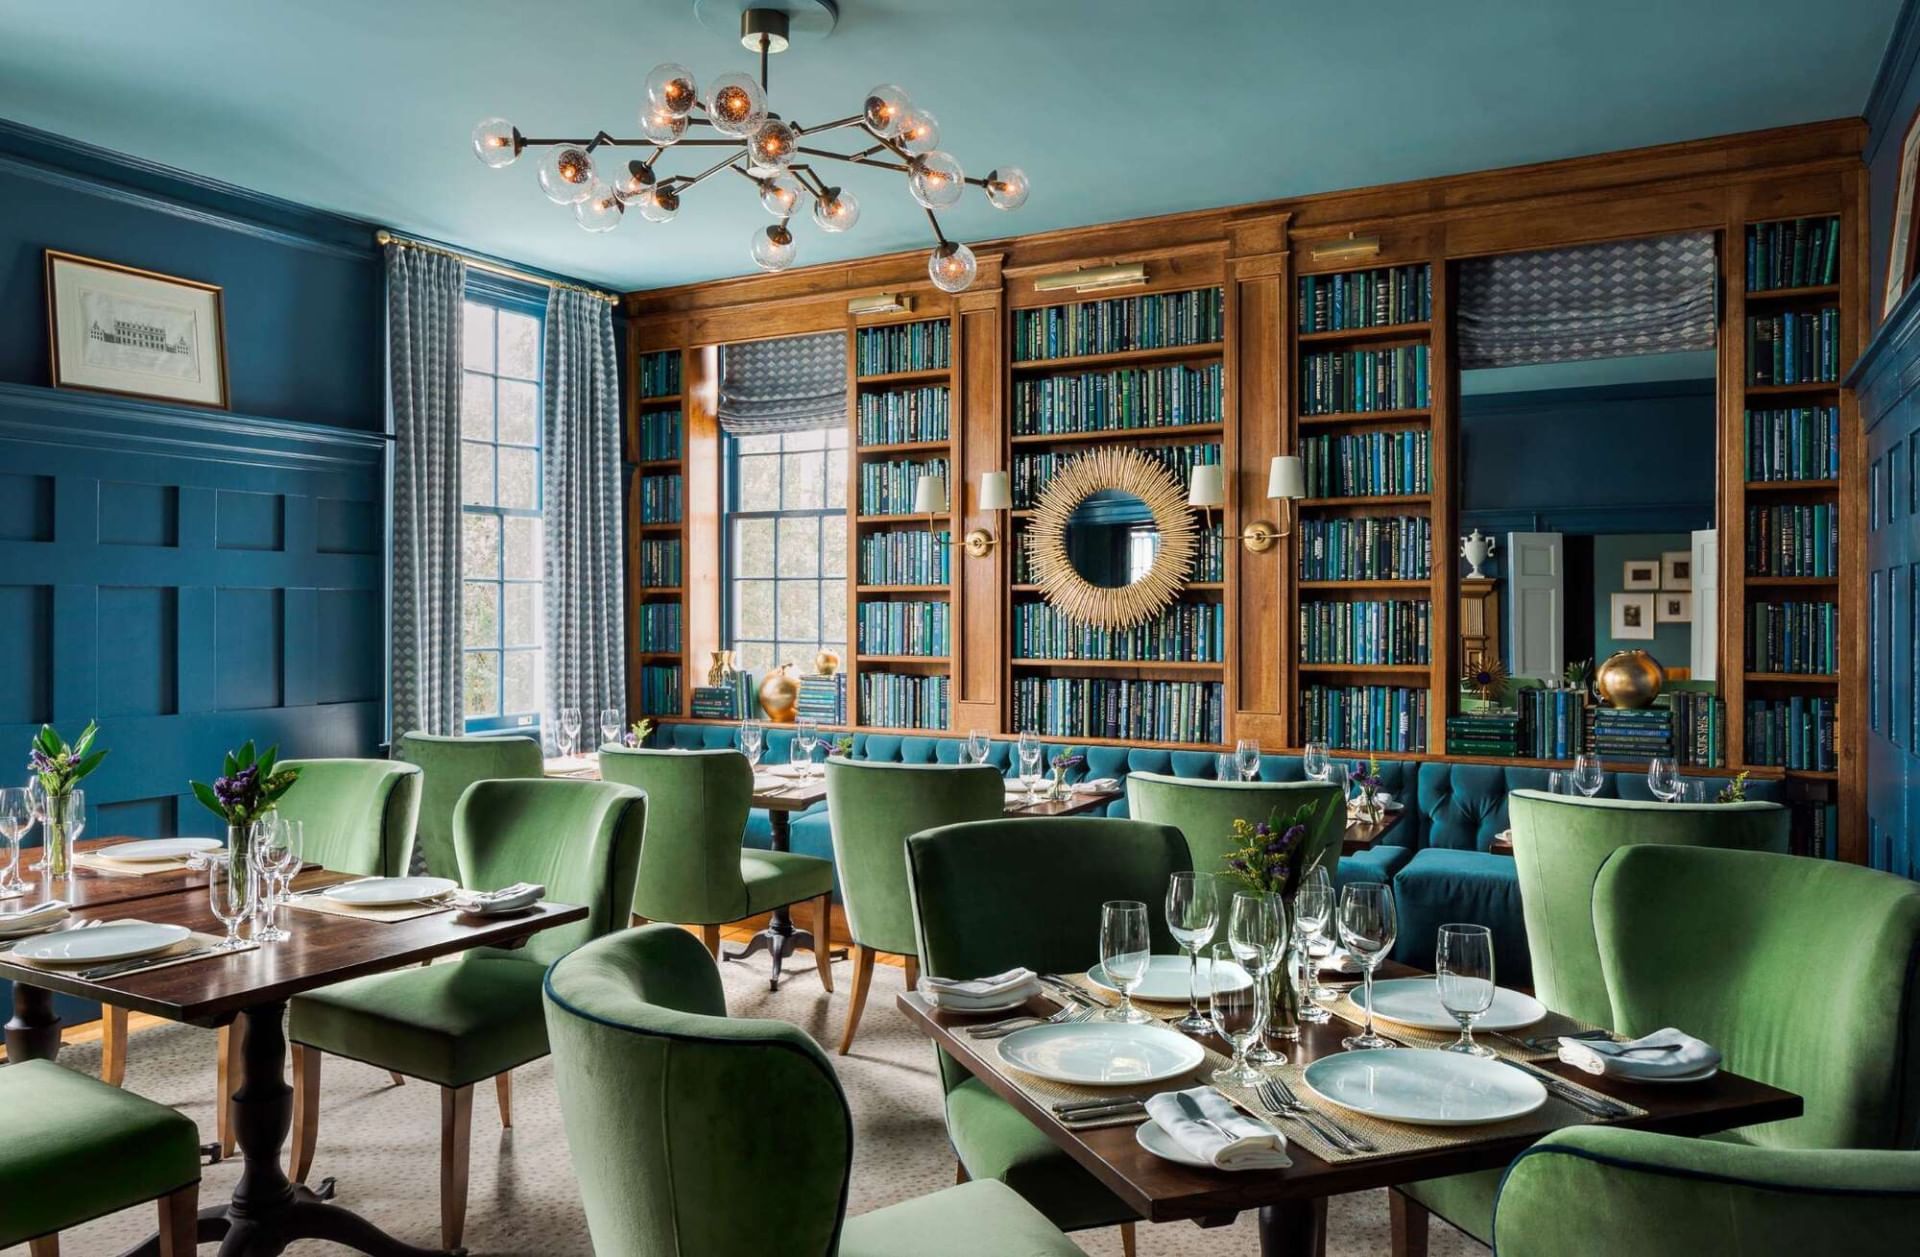 Green comfy chairs, dining tables with glassware, bookshelves & chandelier in The Library at The Clifton